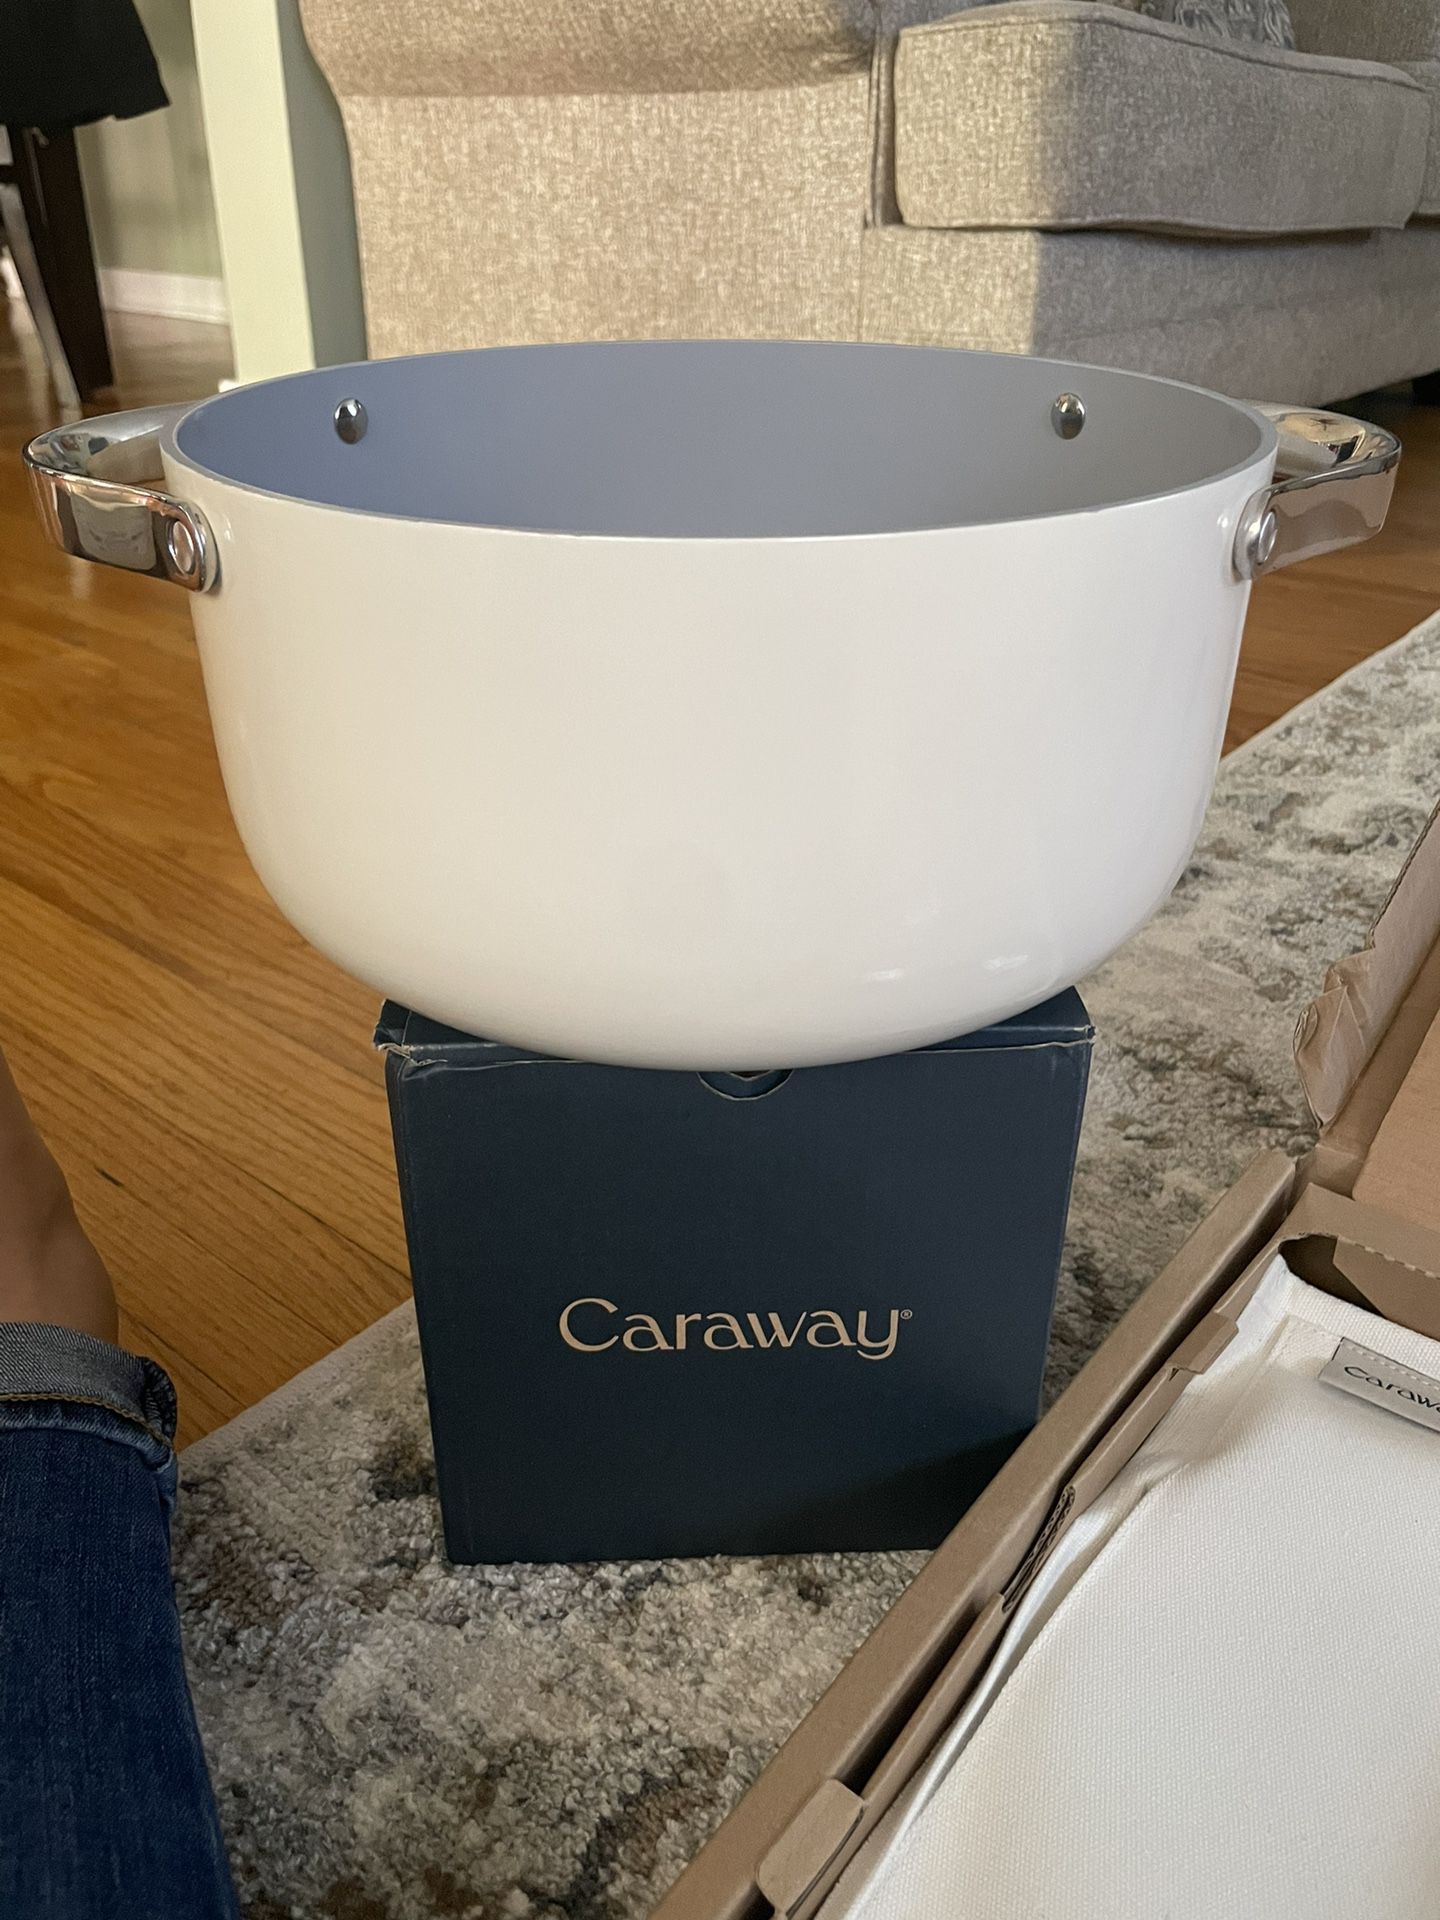 Caraway Home 7-Piece Cream Ceramic Non-Stick Cookware Set with Gold  Hardware for Sale in Bonita, CA - OfferUp